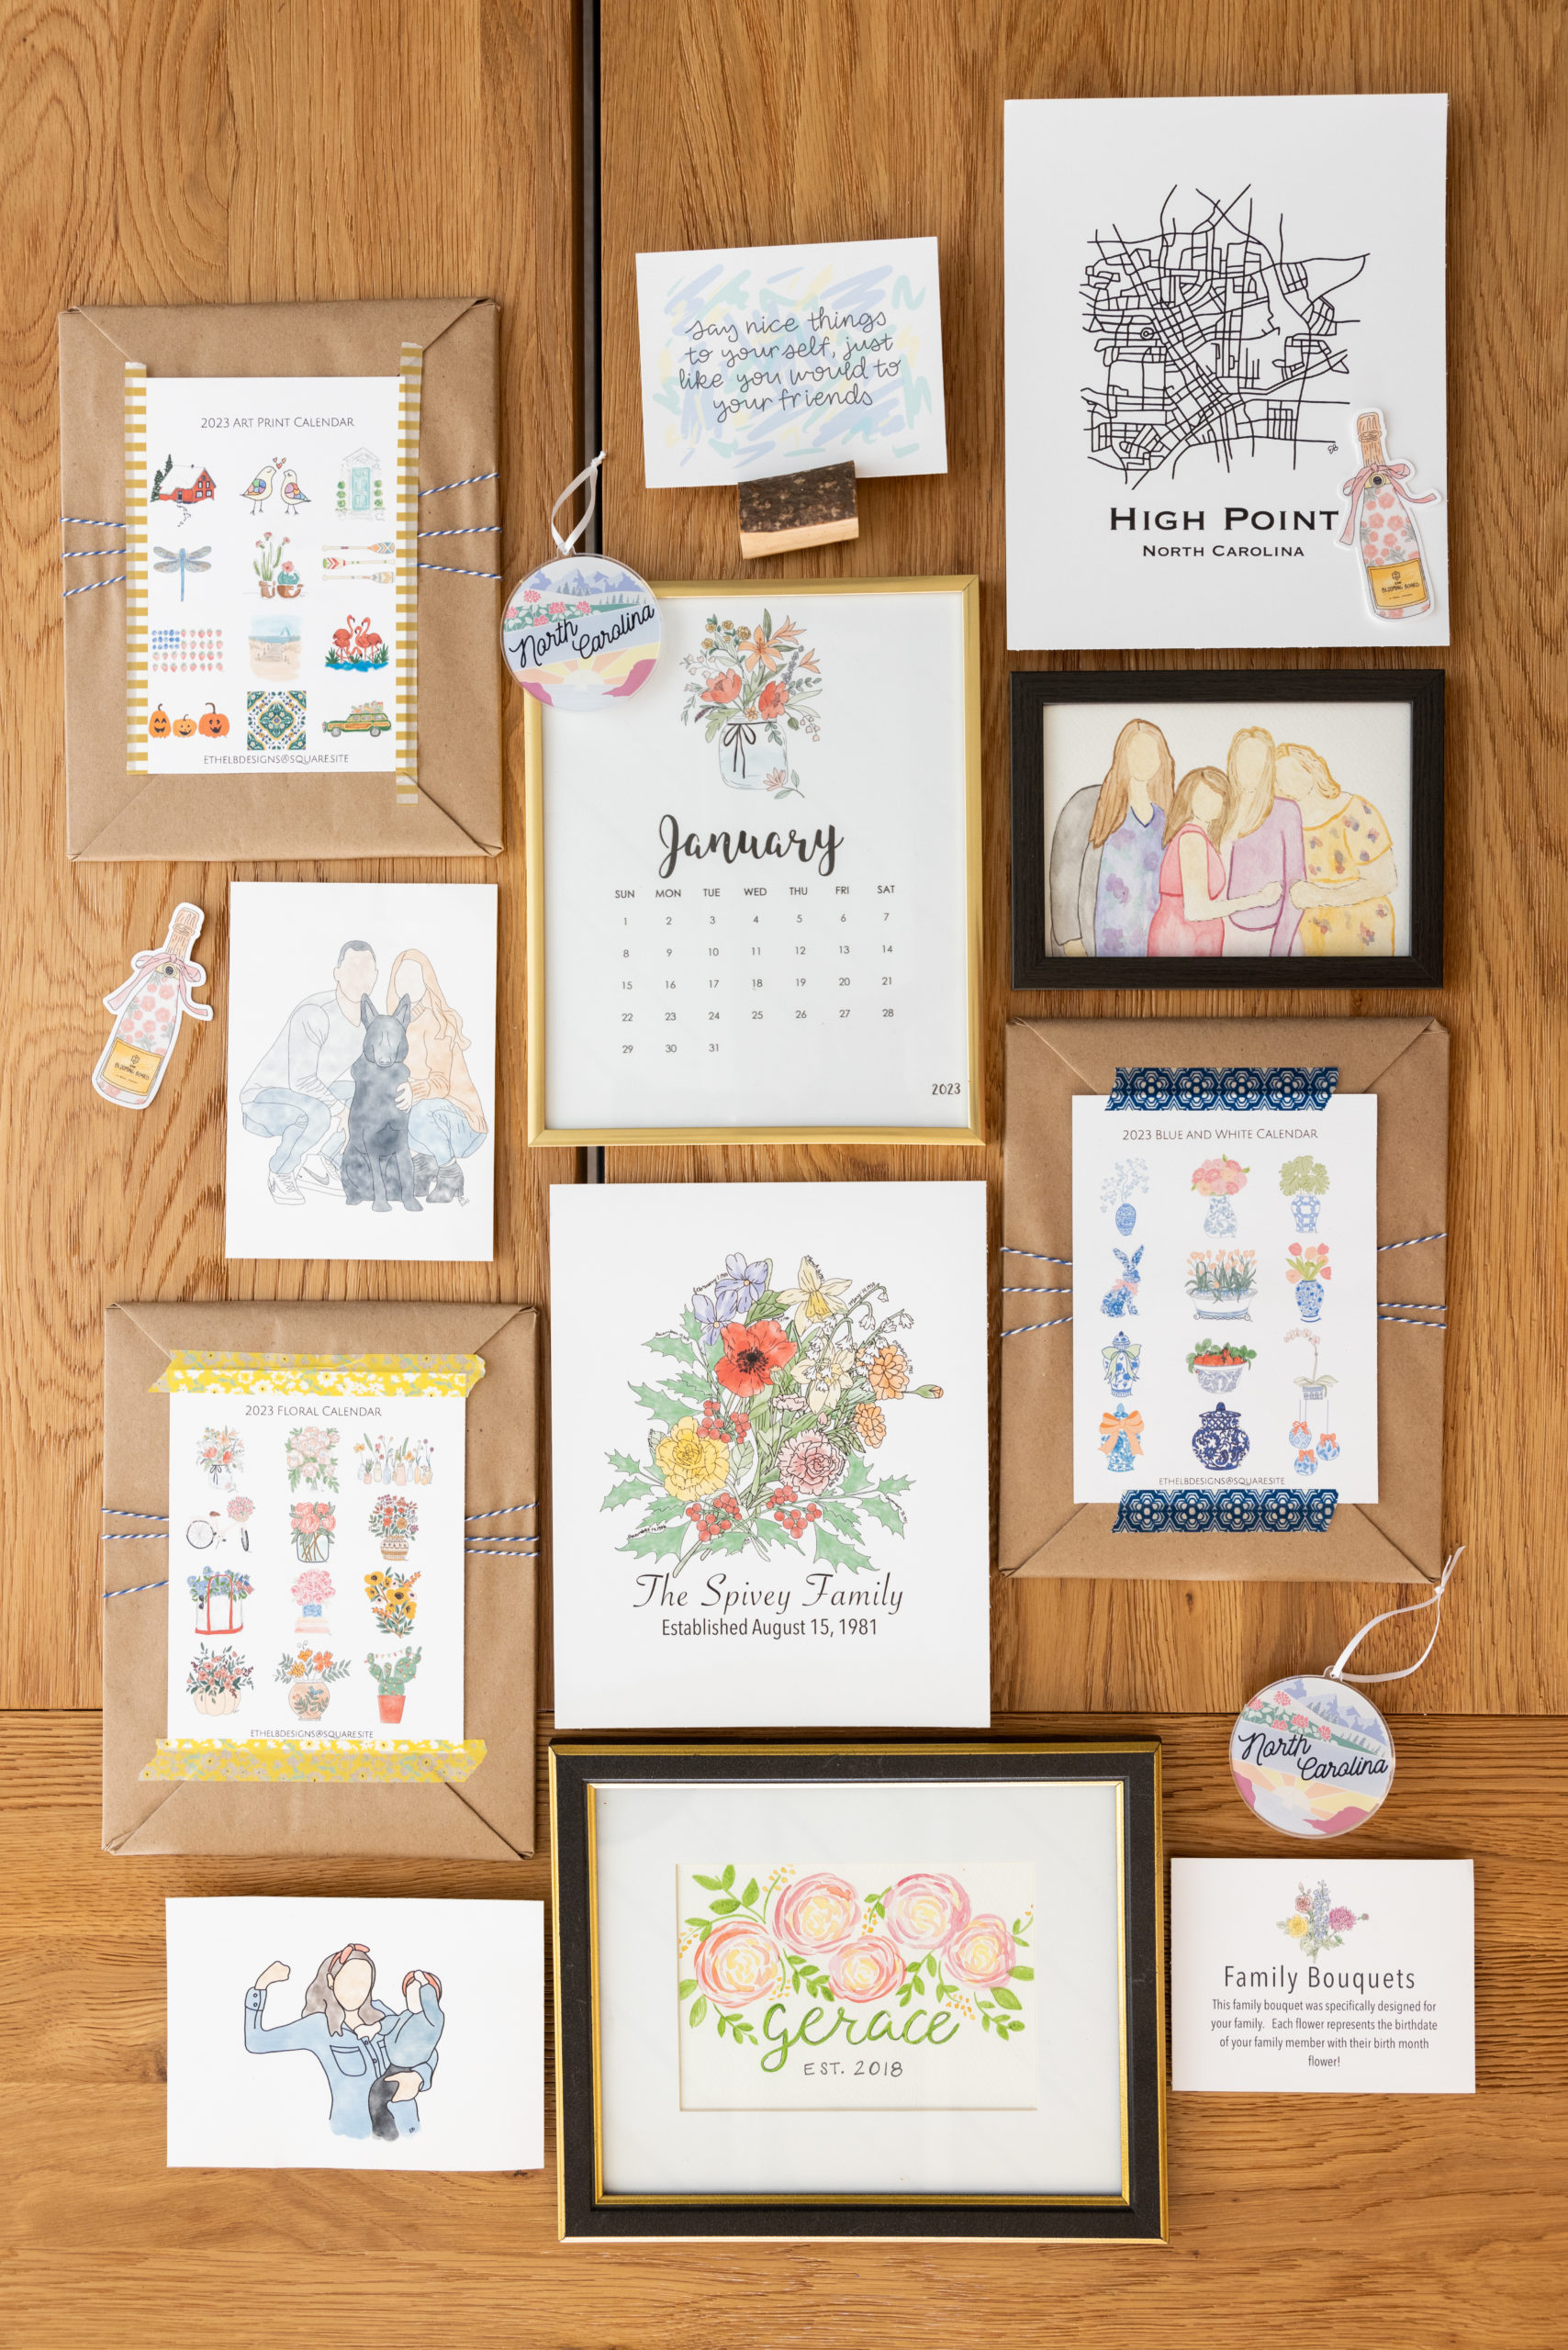 A flat lay of artwork and greeting cards from Ethel B Designs.